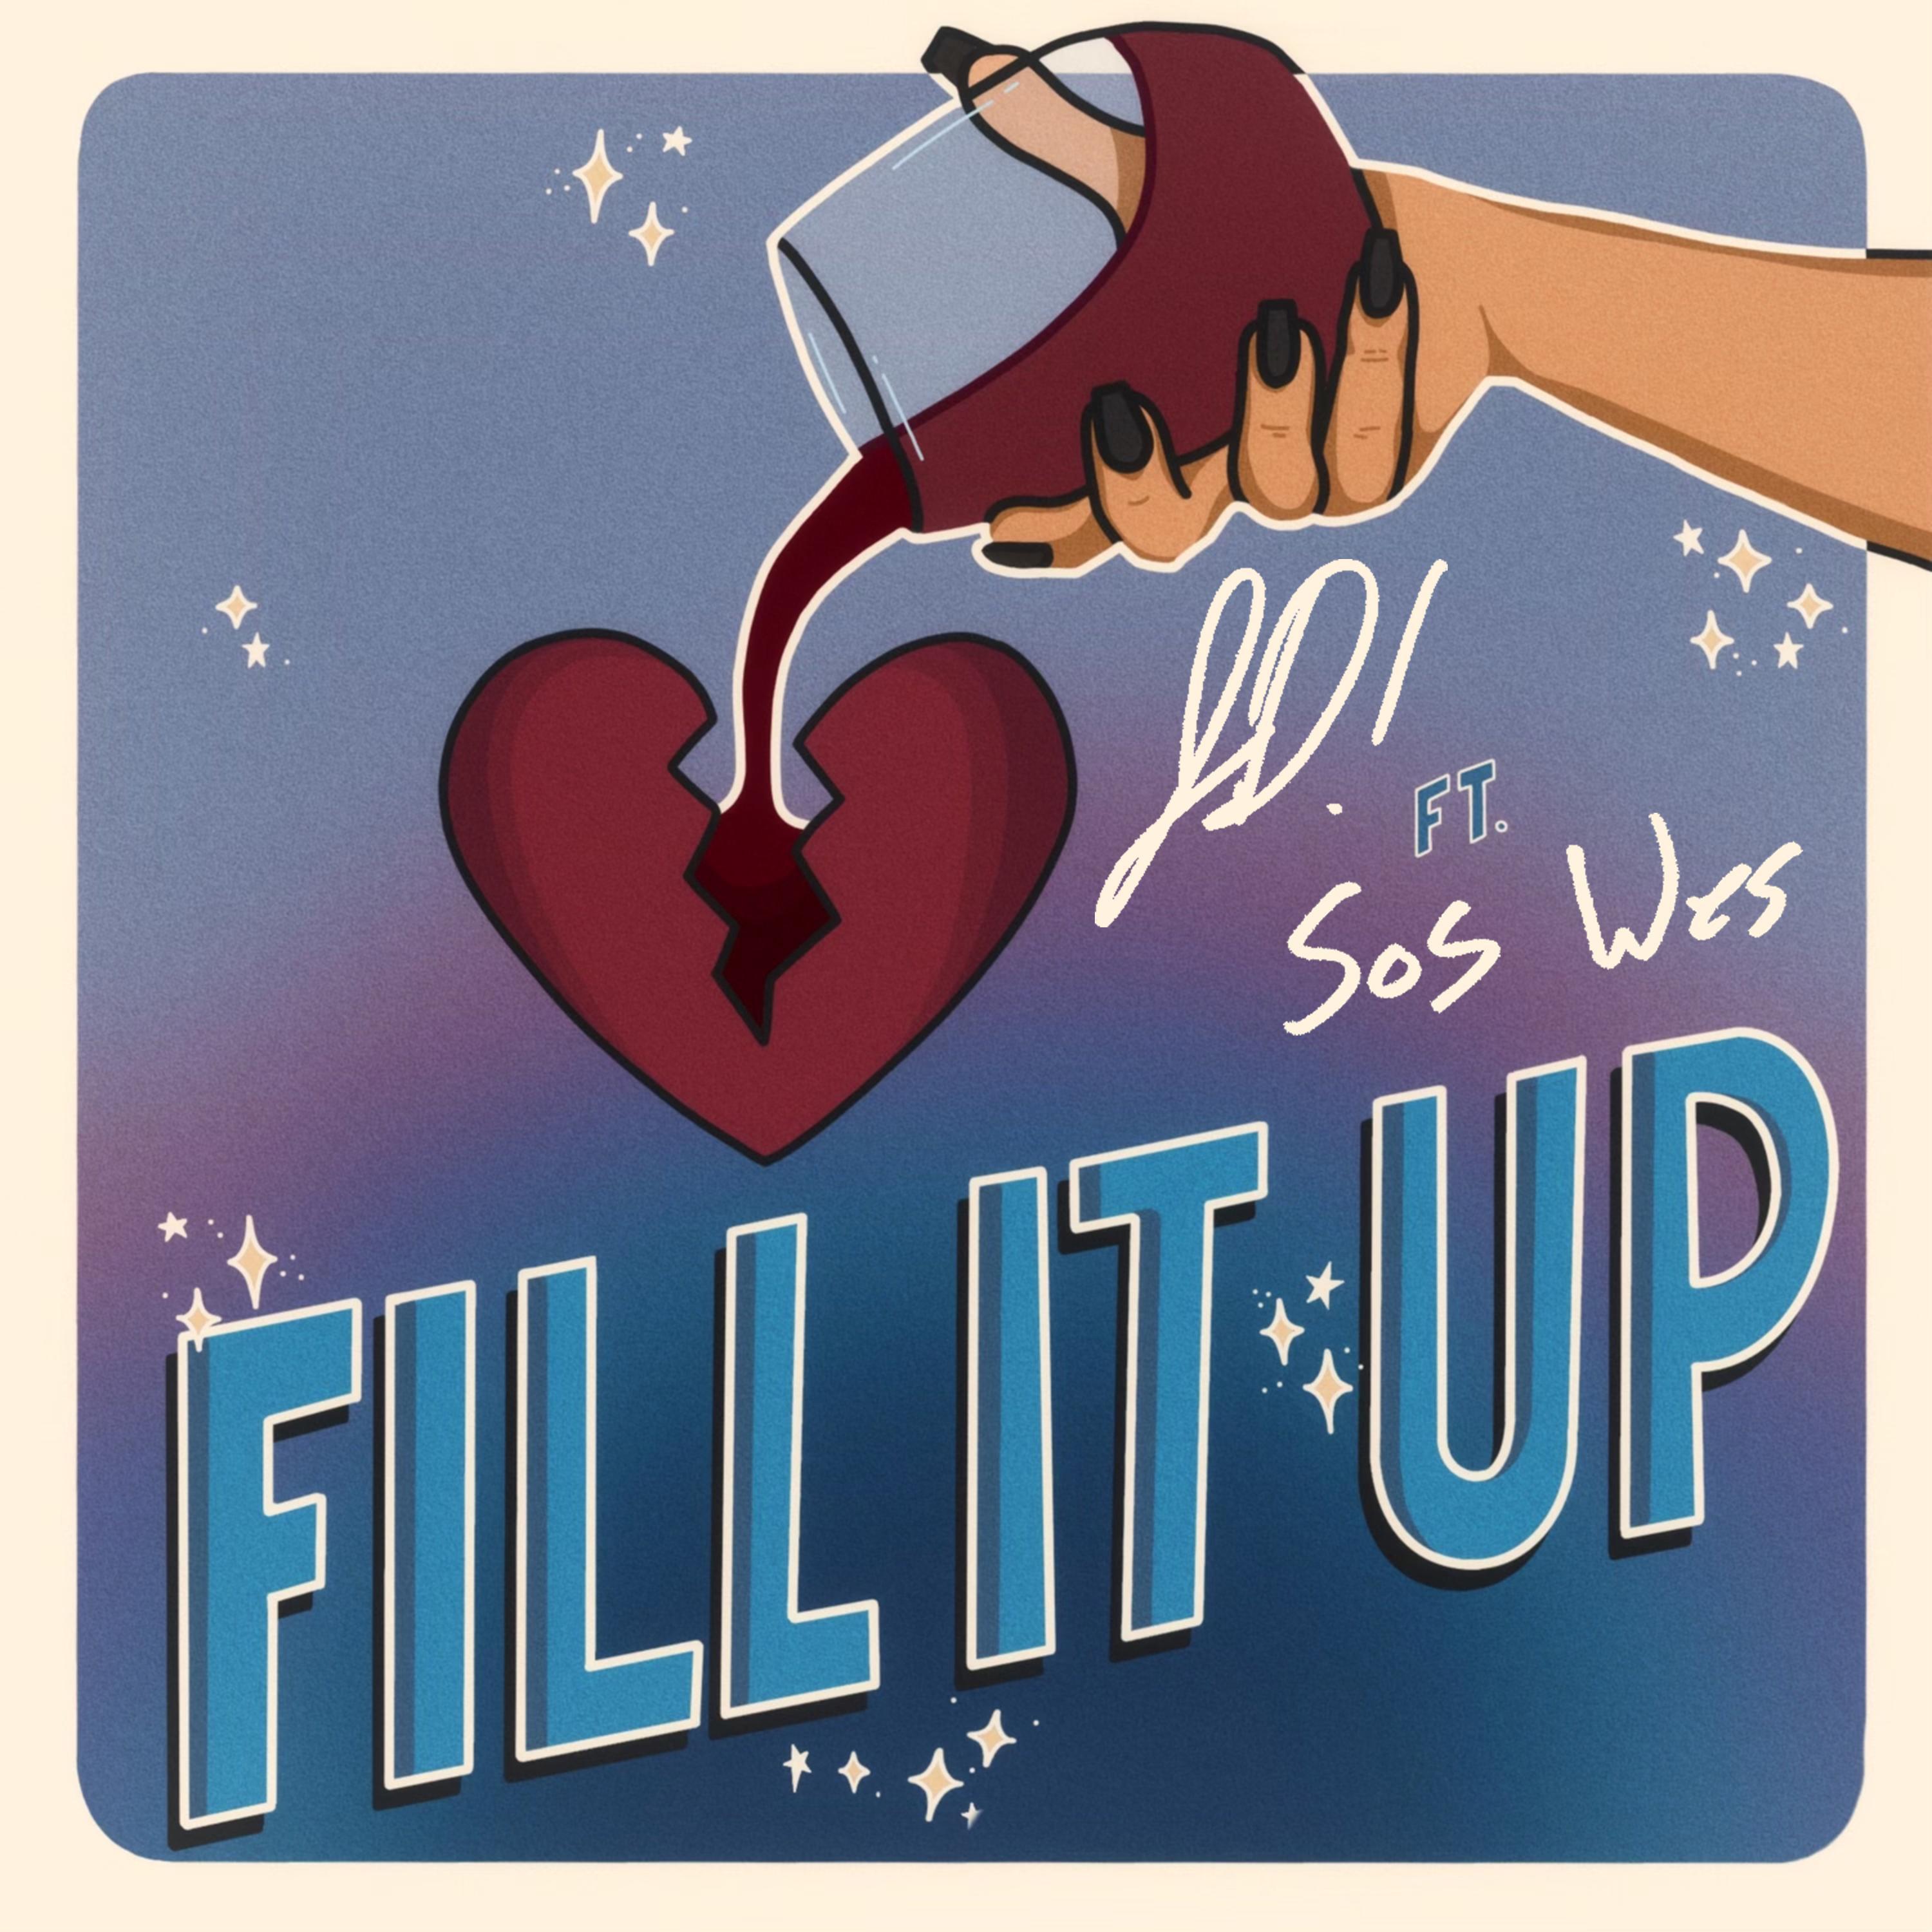 JD! - Fill It Up (feat. SOS Wes)